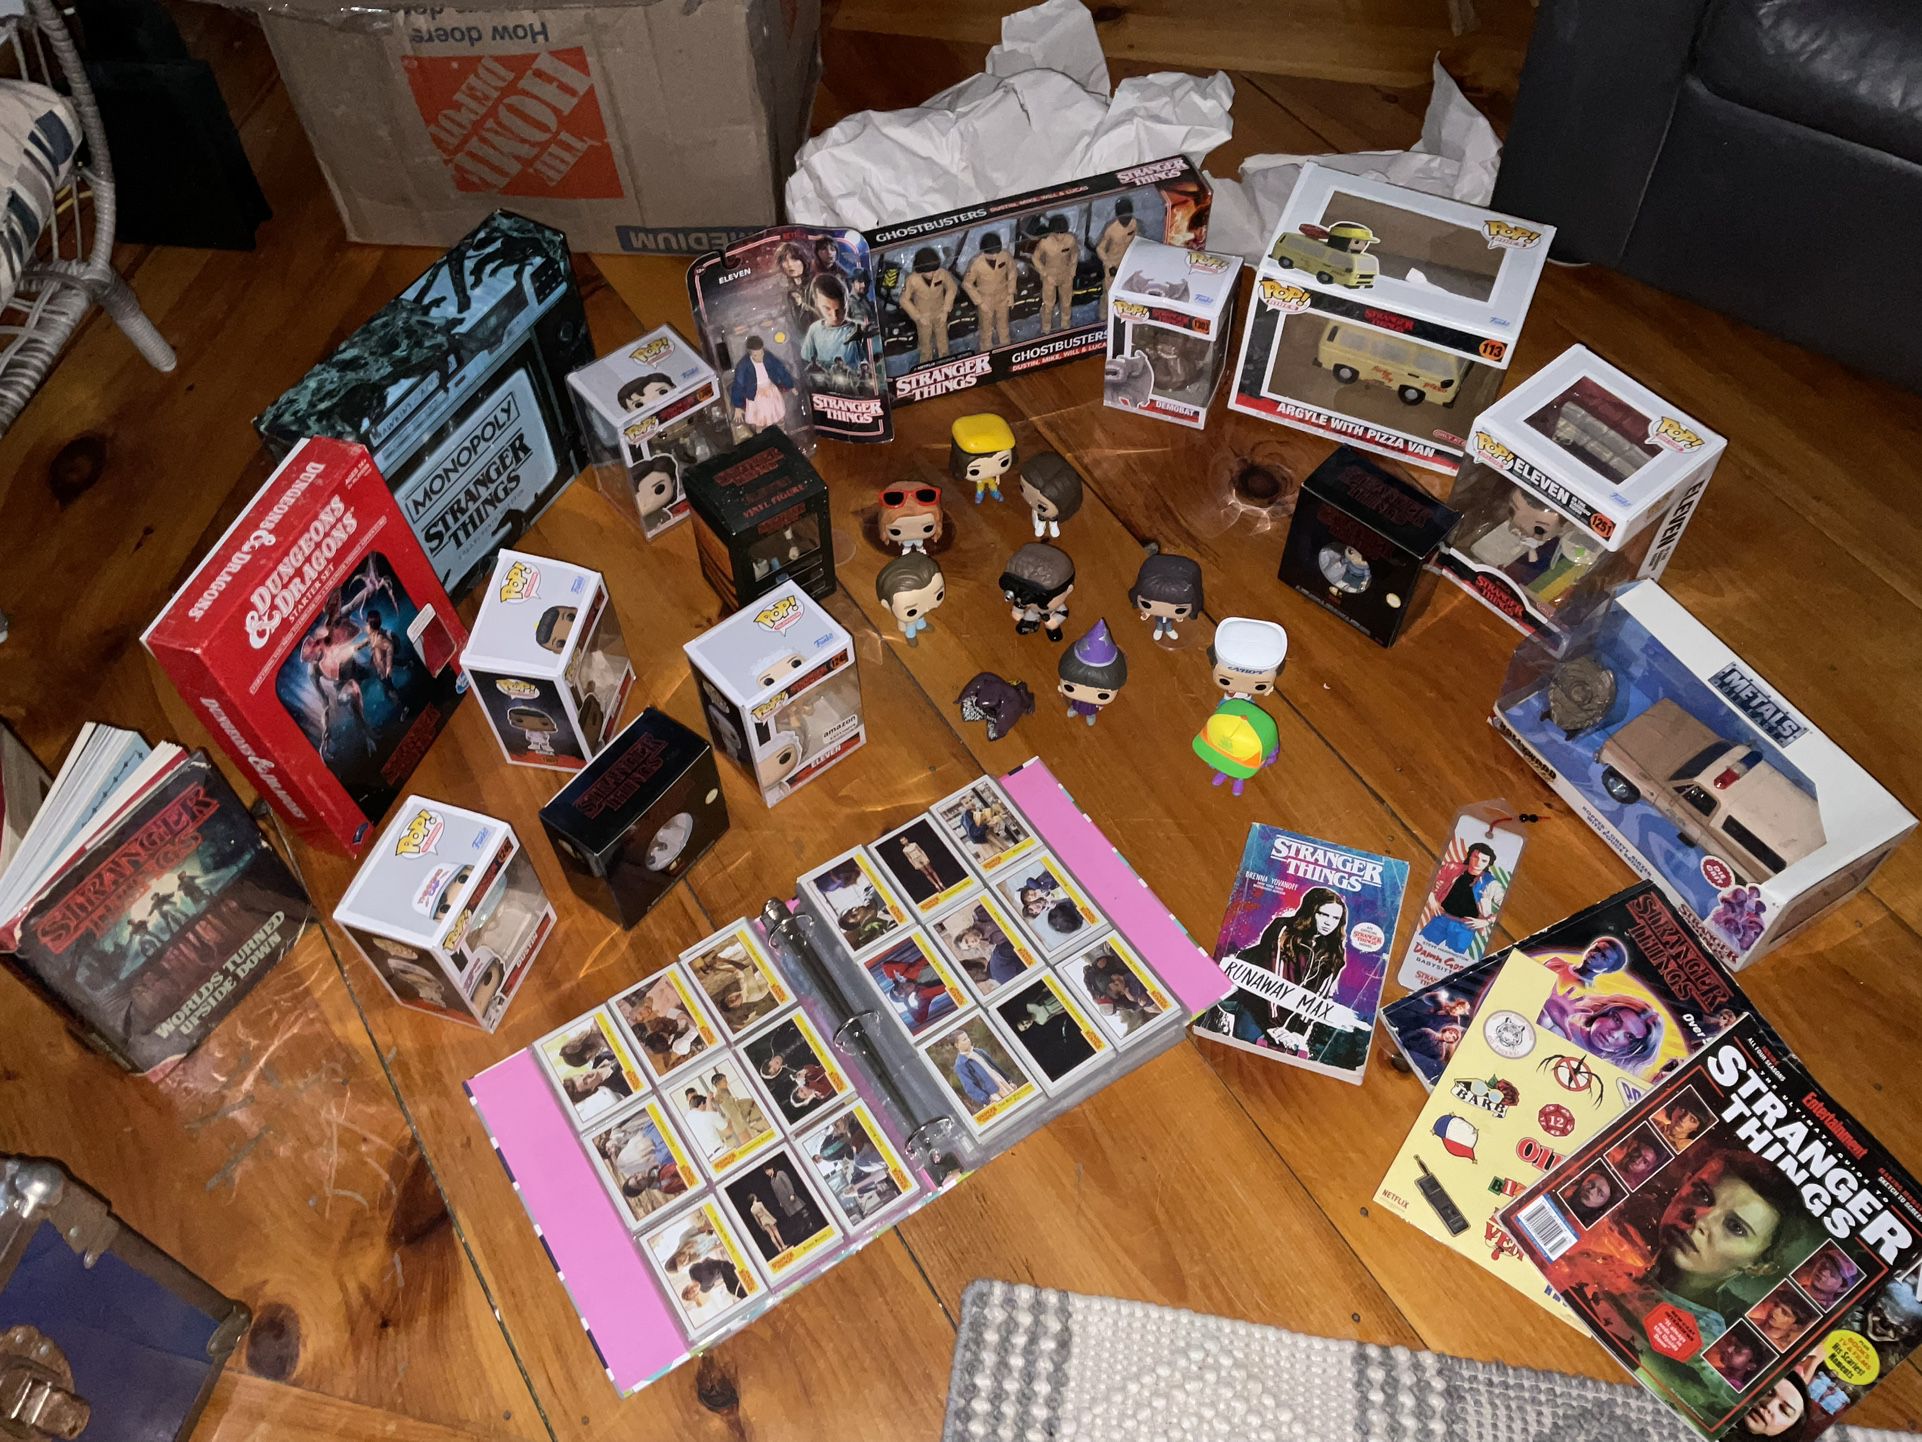 HUGE LOT OFF STRANGER THINGS FUNKO POP ELEVEN, ROBIN,STEVE,EDDIE,GROUP OF THEM IN GHOST BUSTER COSTUME SO MUCH MORE!